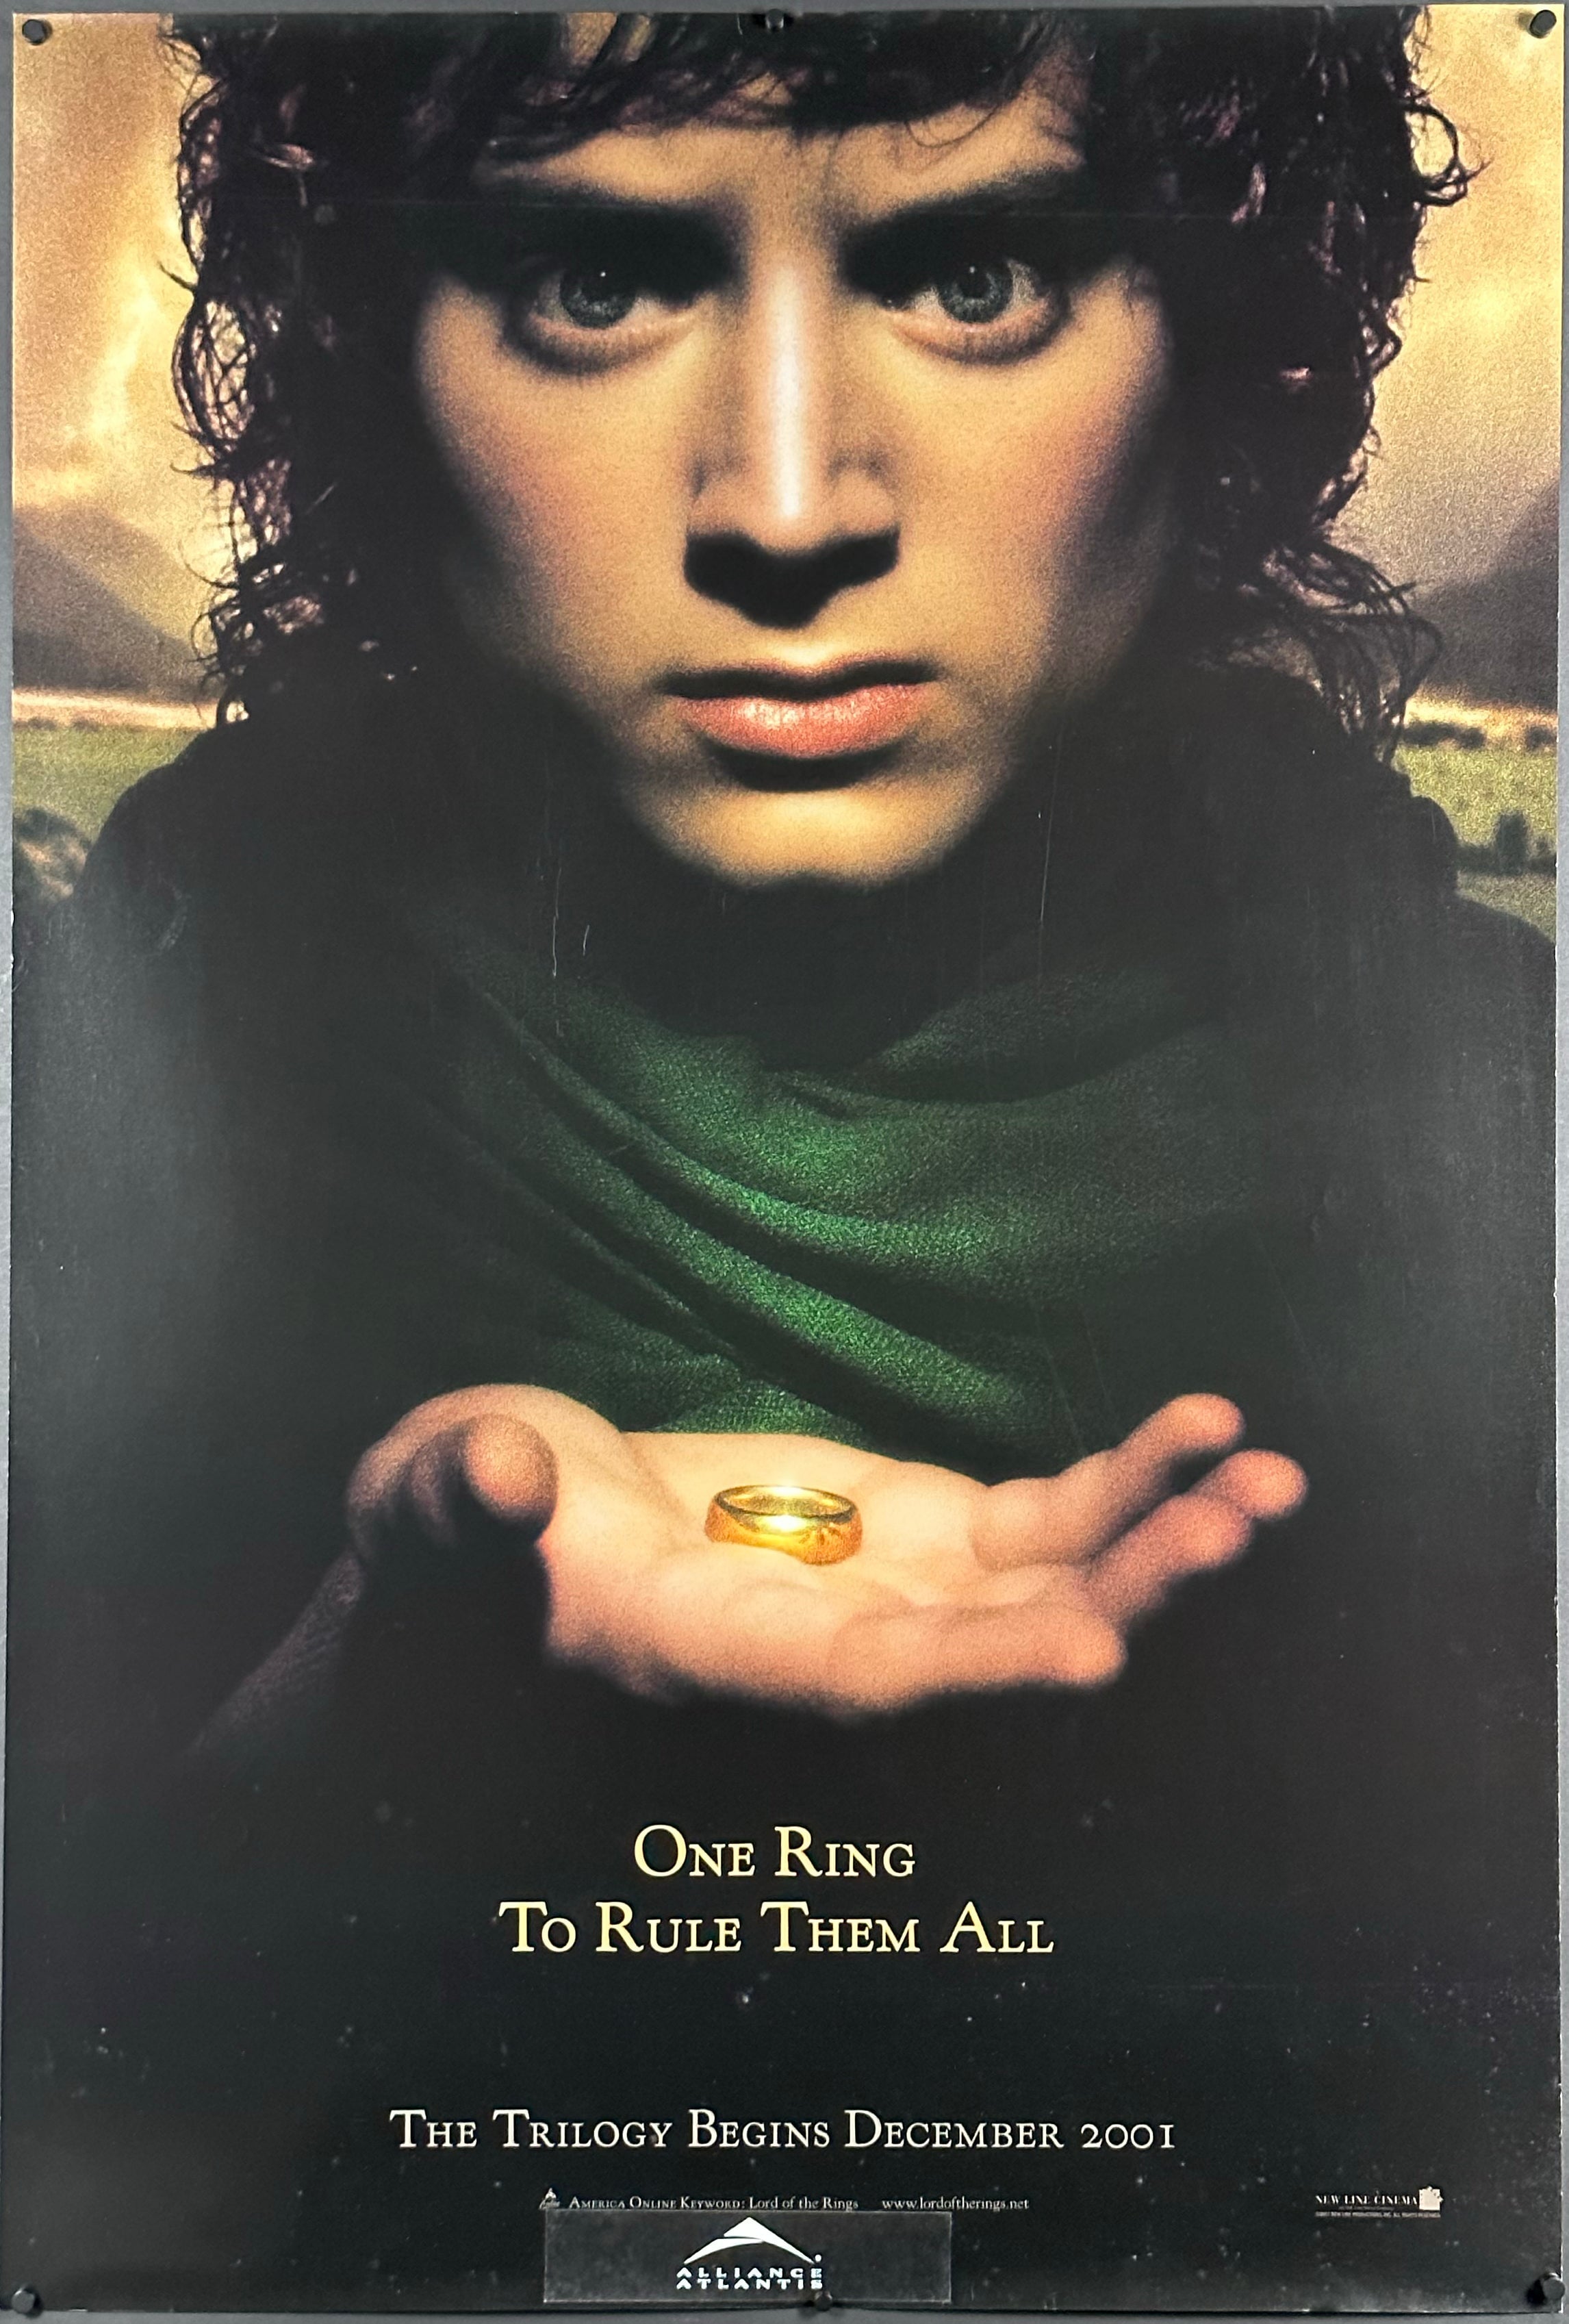 The Lord of the Rings: The Fellowship Of The Ring (2001) Official